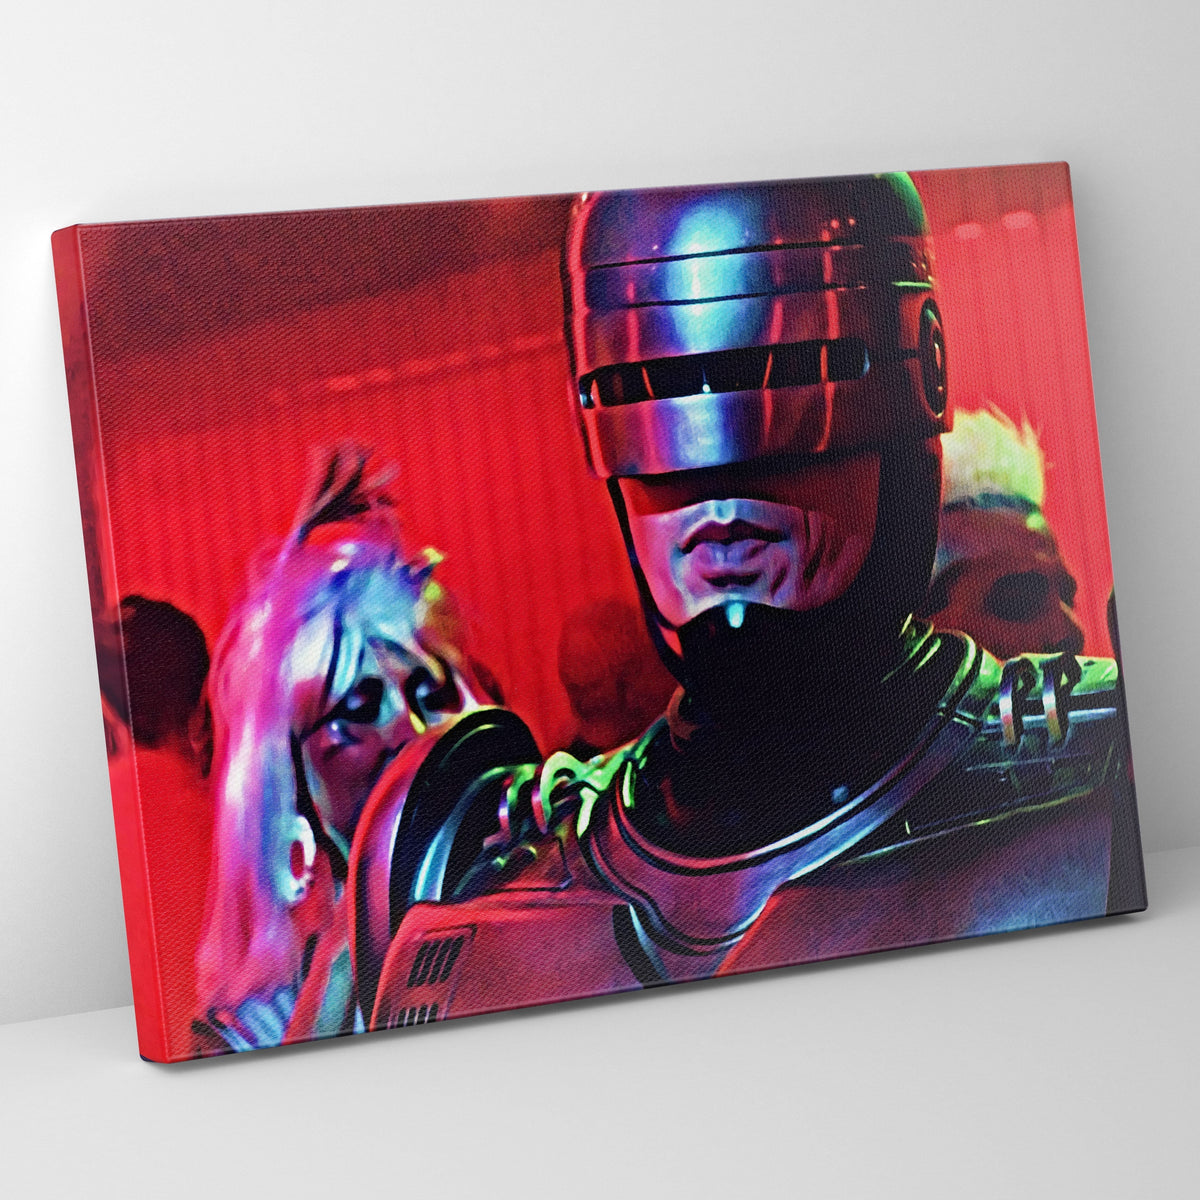 Robocop In The Club Poster/Canvas | Far Out Art 